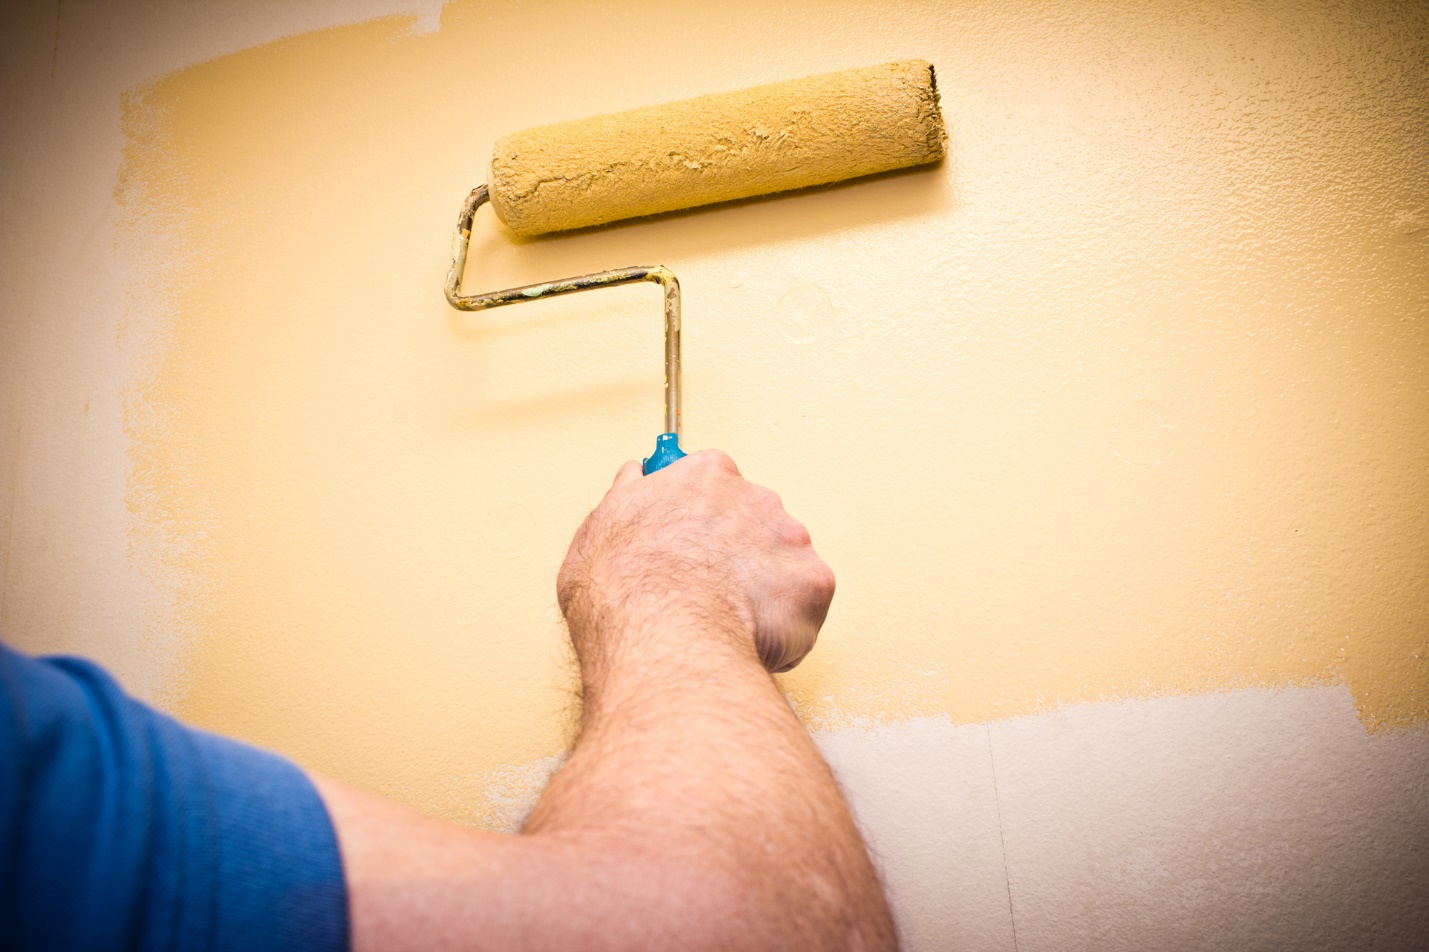 Interior Commercial Painting: Common Mistakes to Avoid